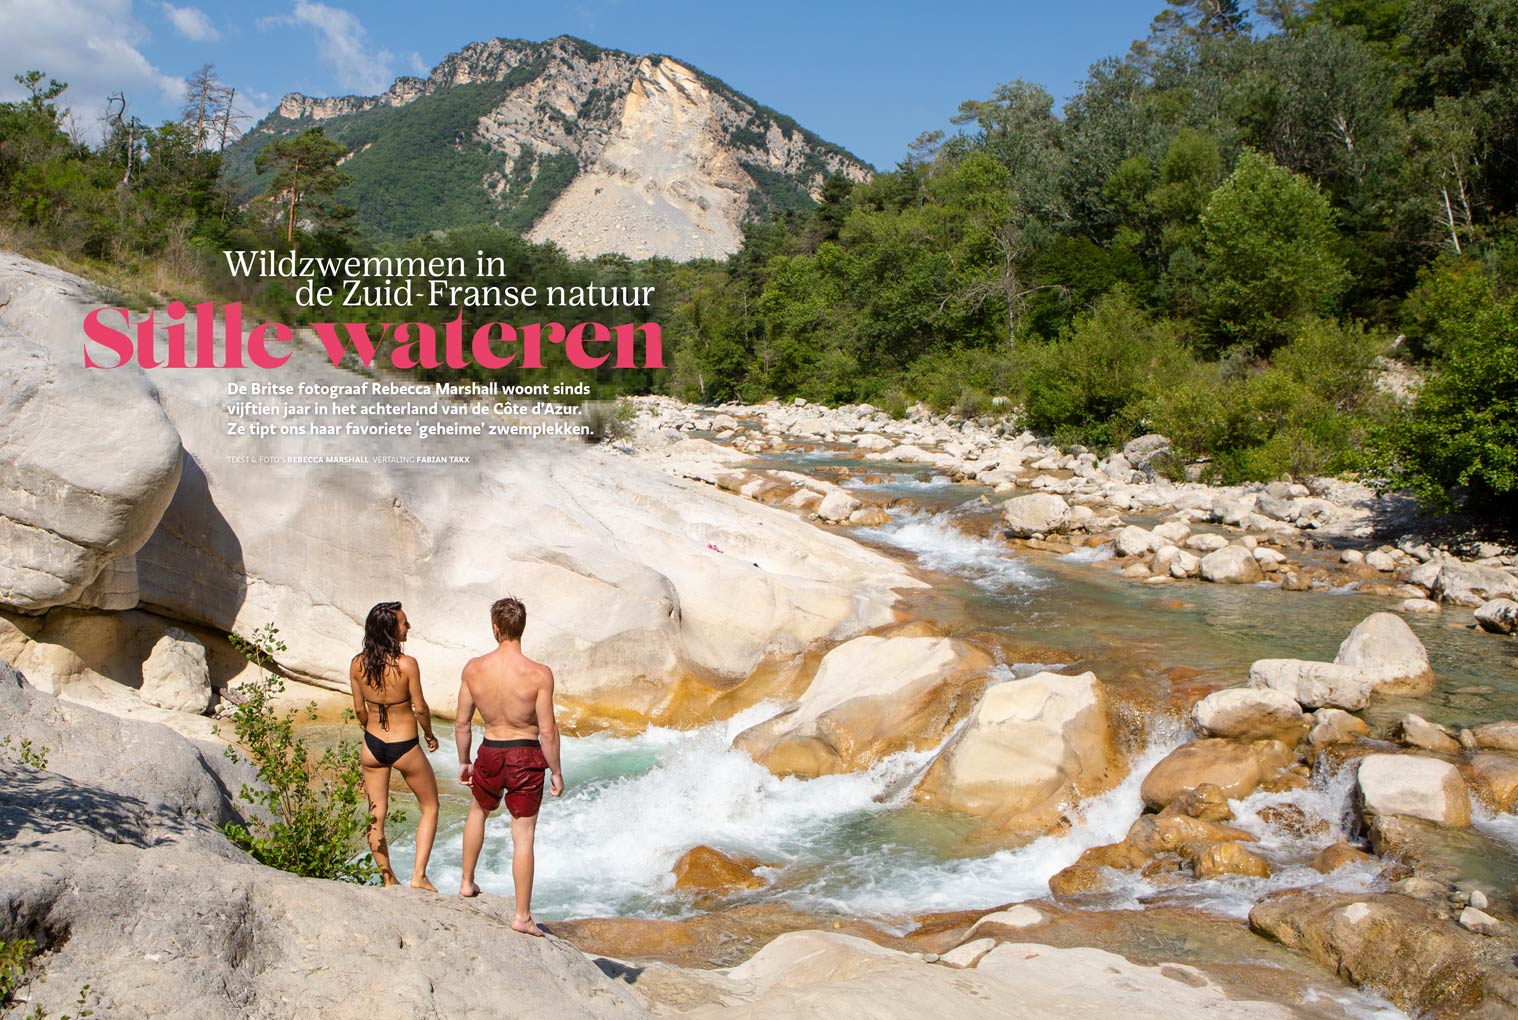 Double page magazine spread showing a full bleed photograph of a couple standing by rapids in a mountain landscape